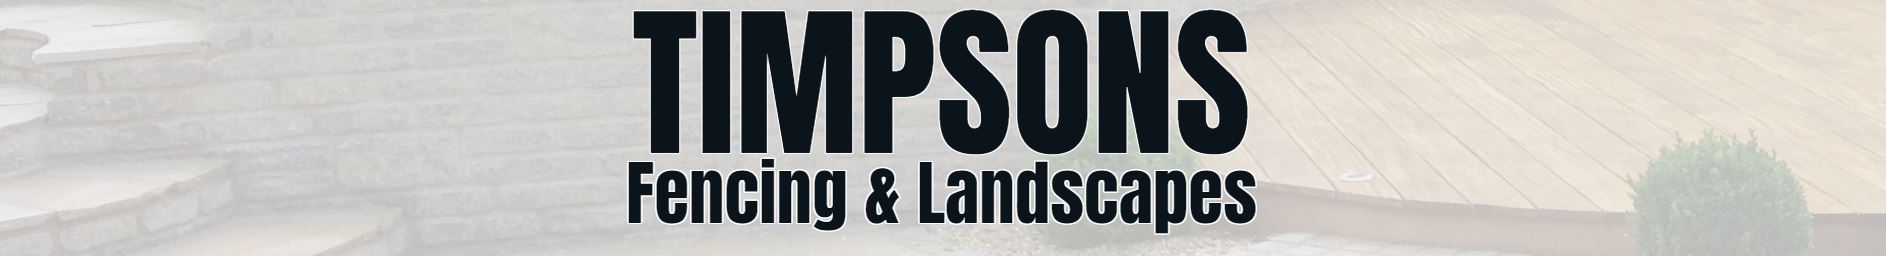 Main photo for Timpson’s Fencing and Landscaping